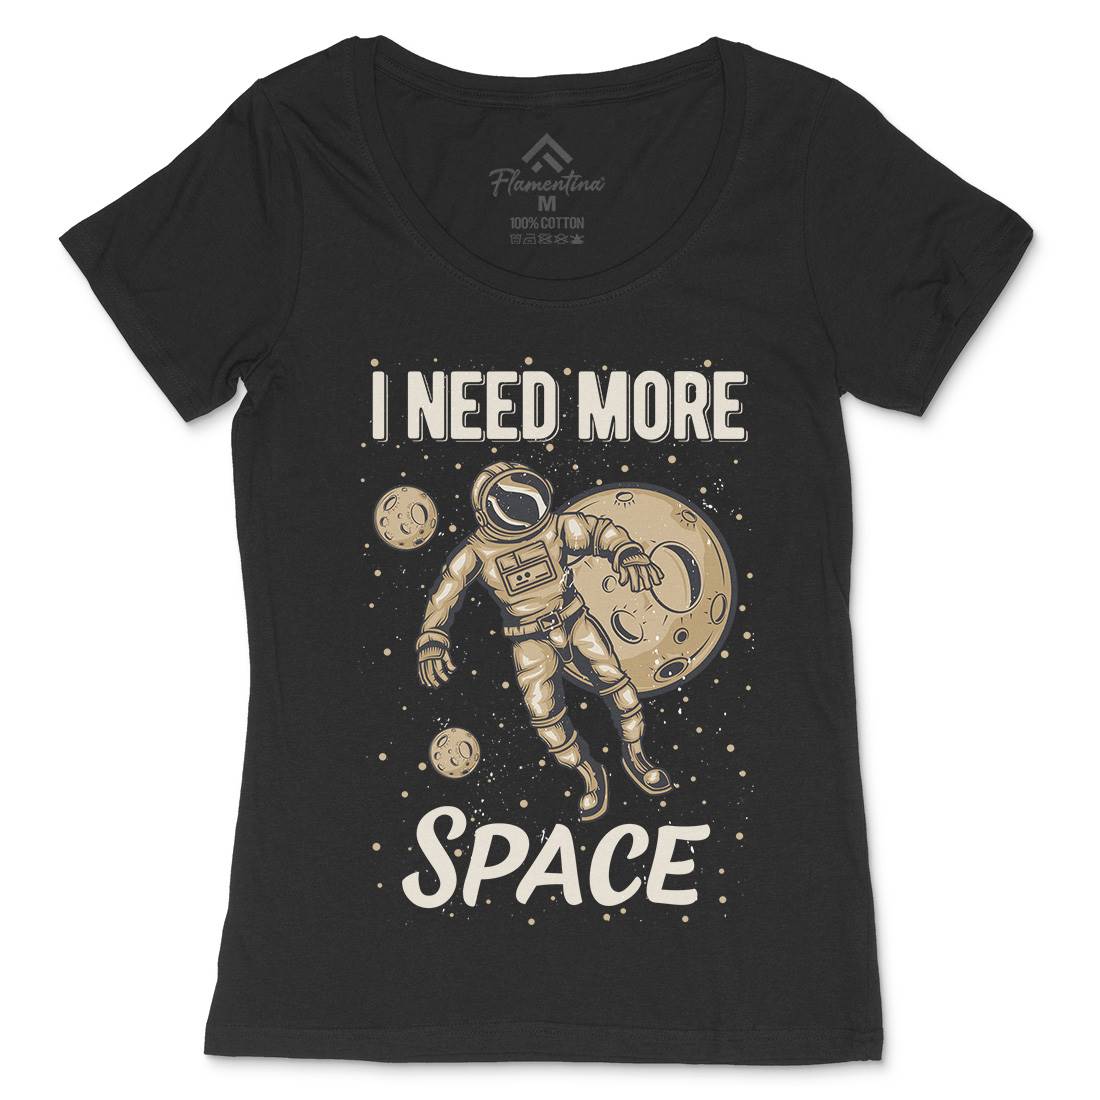 Need More Womens Scoop Neck T-Shirt Space B168